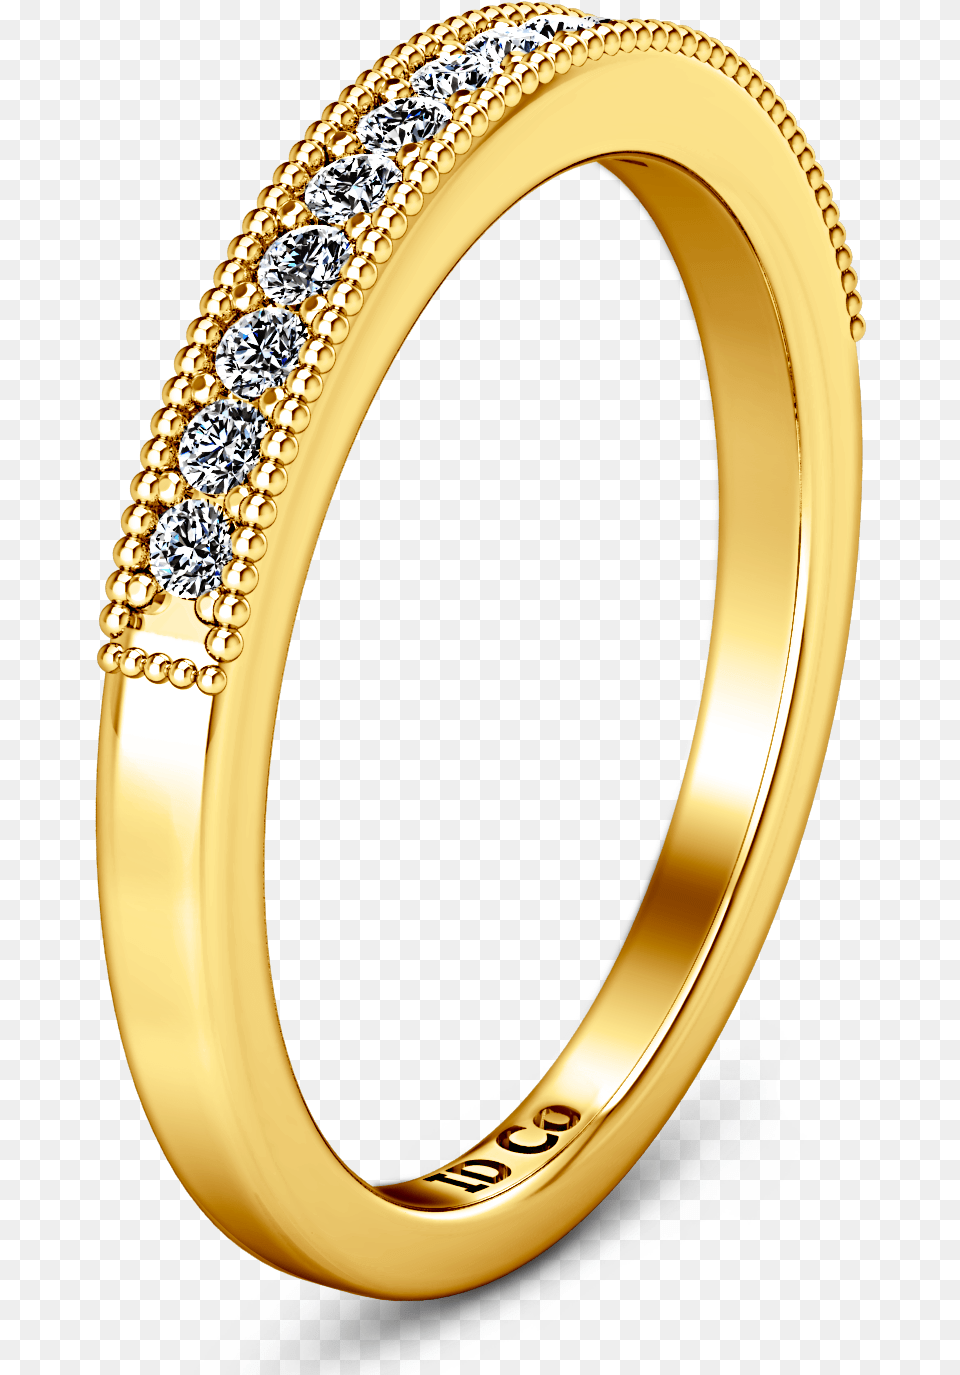 Diamond Wedding Band Tiffany, Accessories, Gold, Jewelry, Ring Png